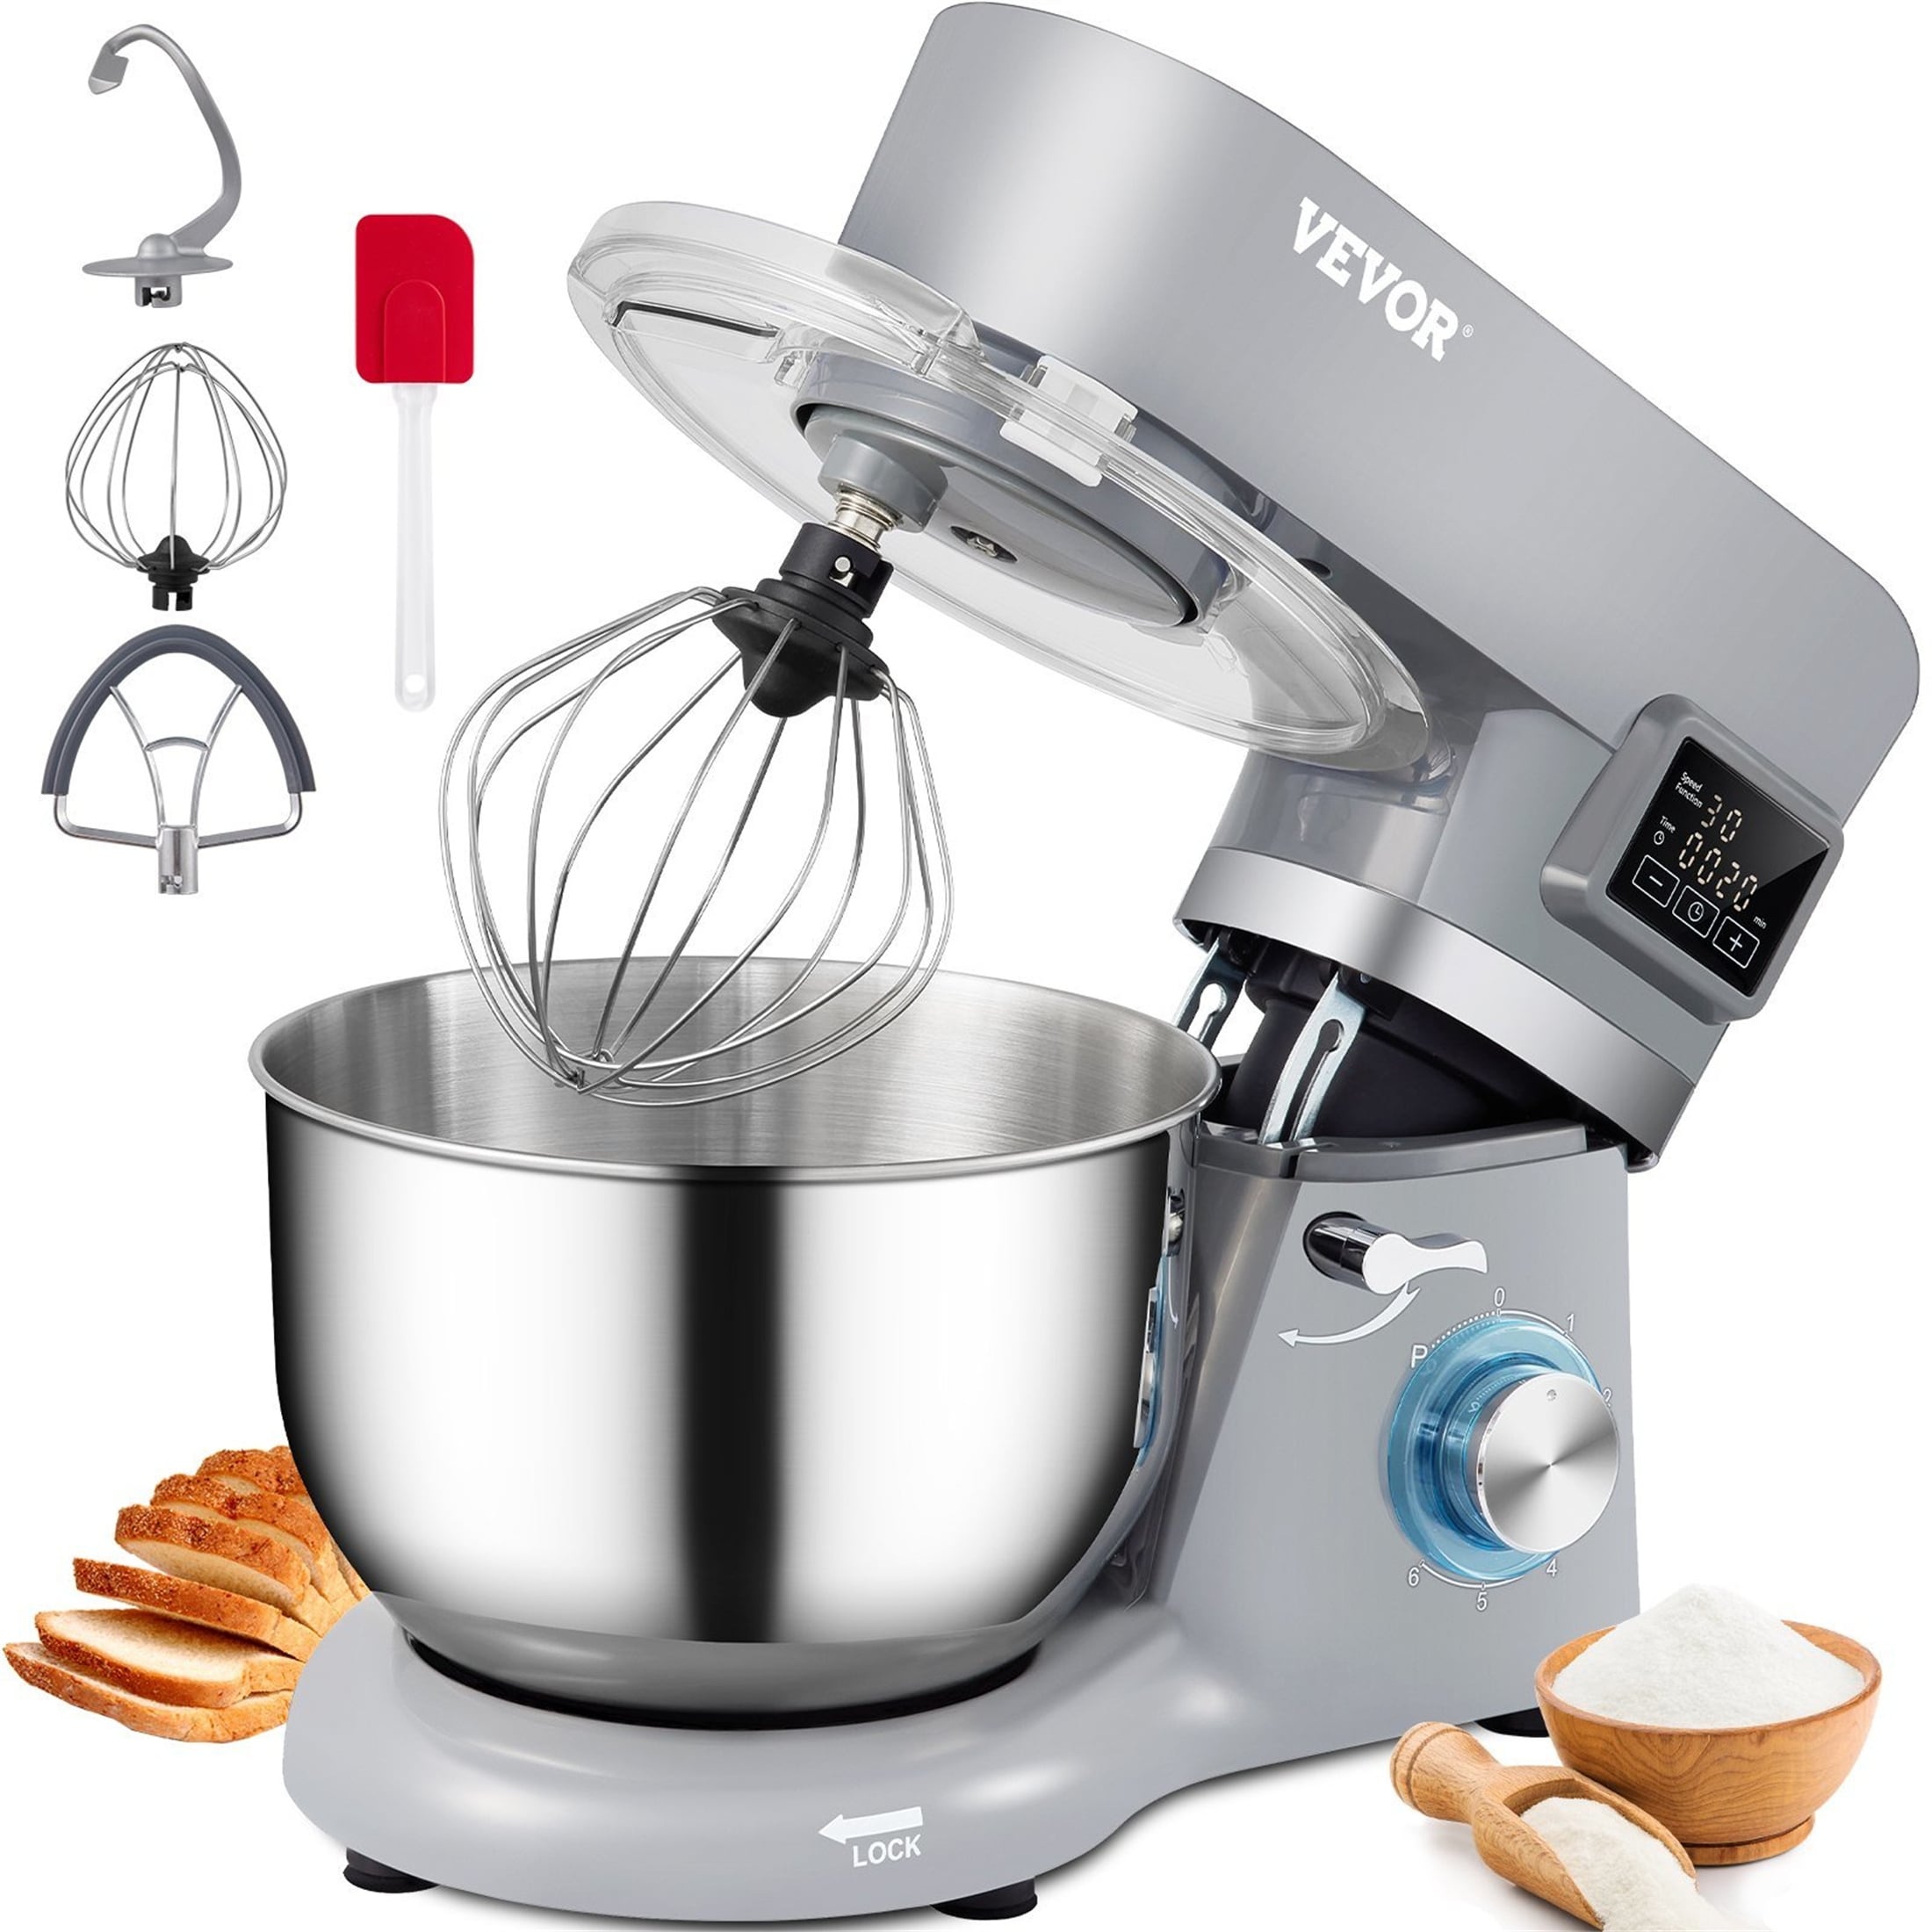 https://ak1.ostkcdn.com/images/products/is/images/direct/c4b02da34f47ffac0448380e8224c82c428c20d0/660W-Electric-Dough-Mixer-with-5.8-Qt-Stainless-Steel-Bowl.jpg